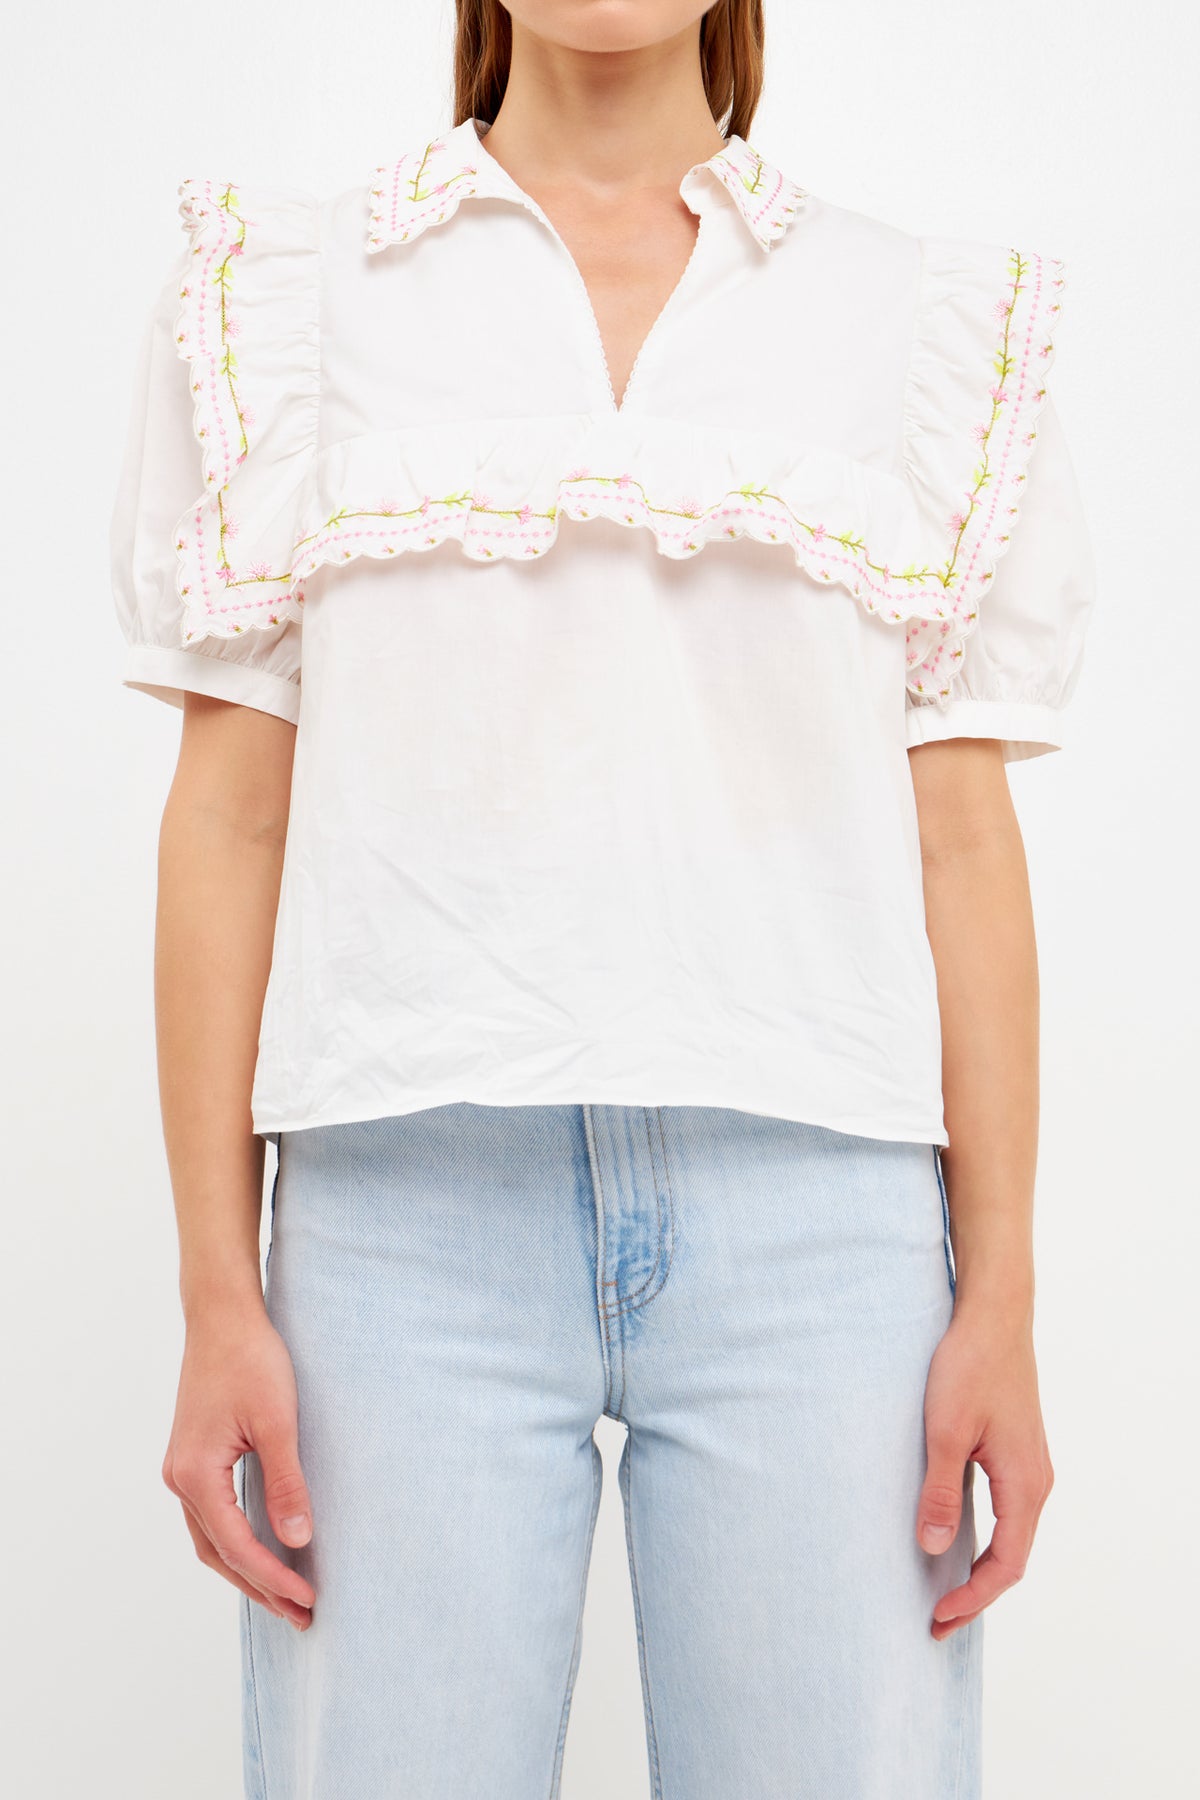 FREE THE ROSES - Floral Embroiderd Short Sleeve Top - TOPS available at Objectrare